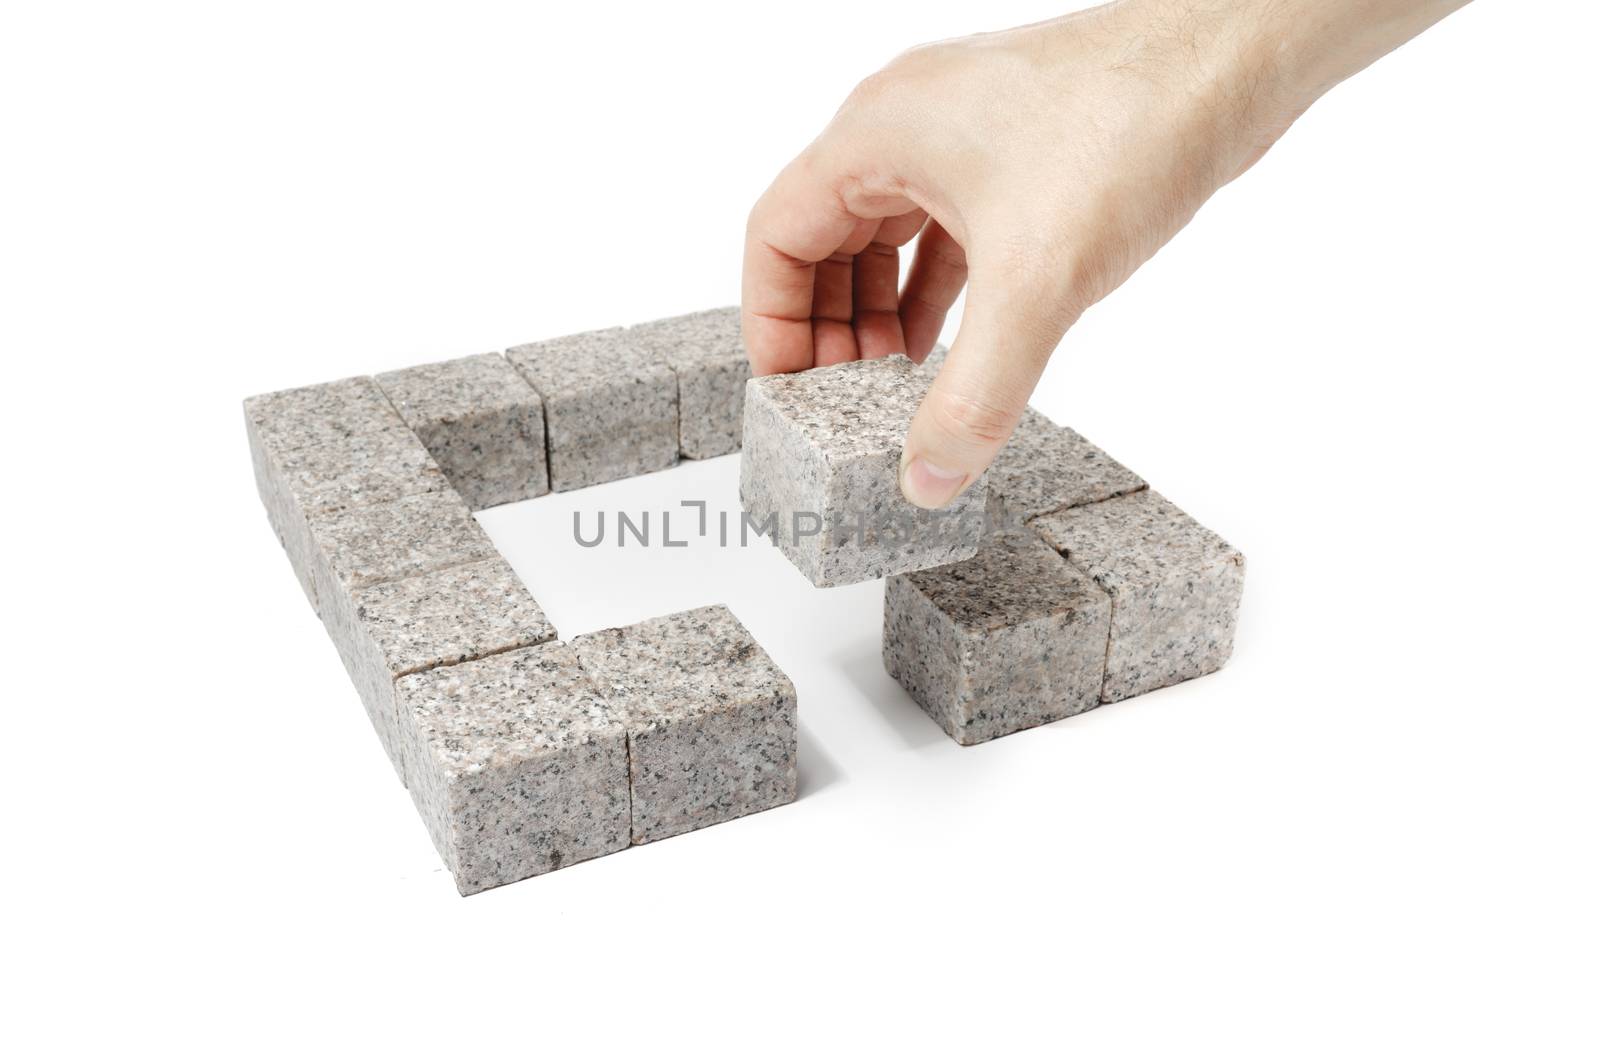 Man finishing a square made of small blocks of granite rock.